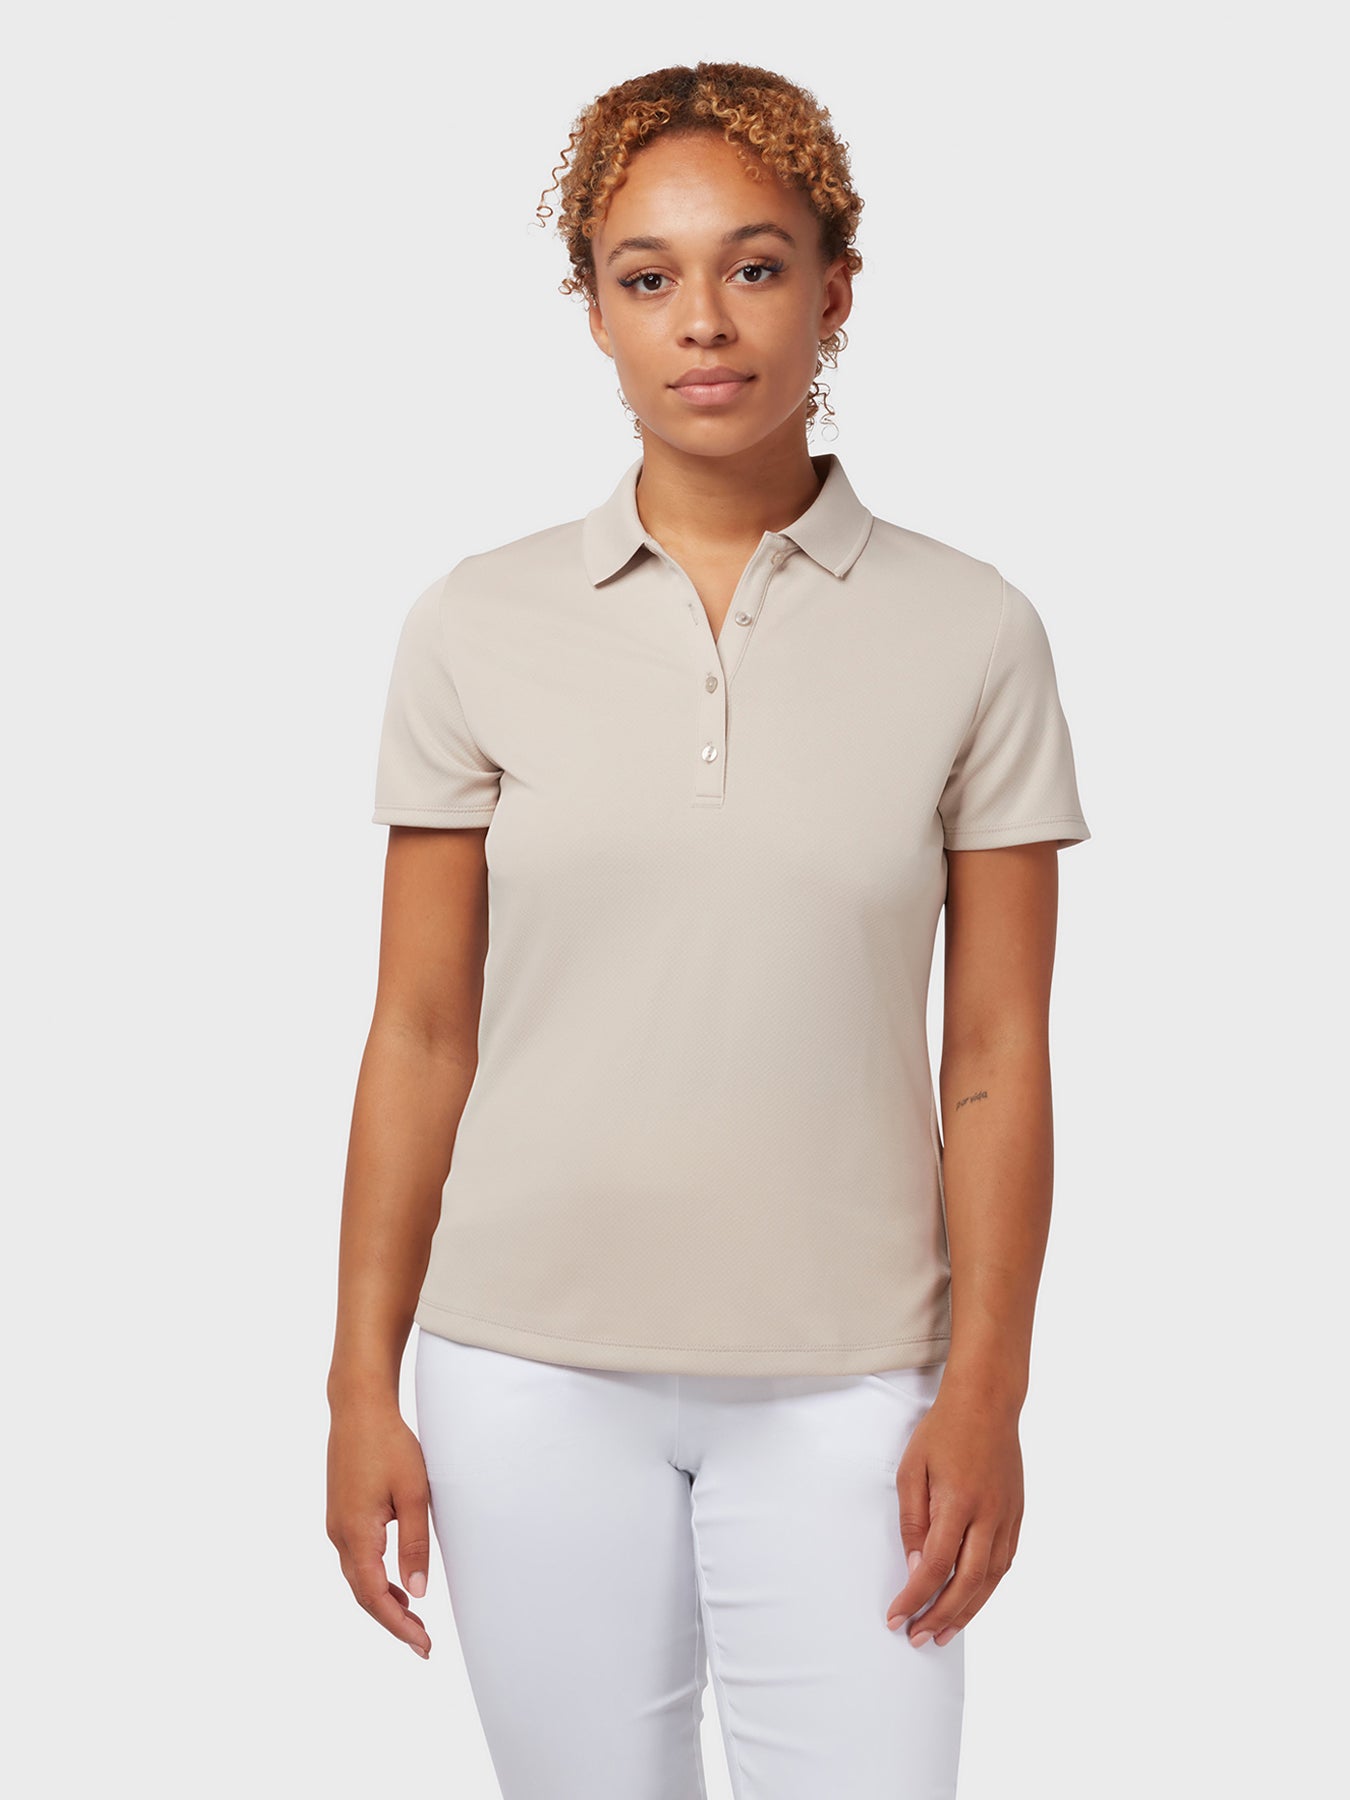 View Swing Tech Womens Polo In Chateau Grey Chateau Grey XL information